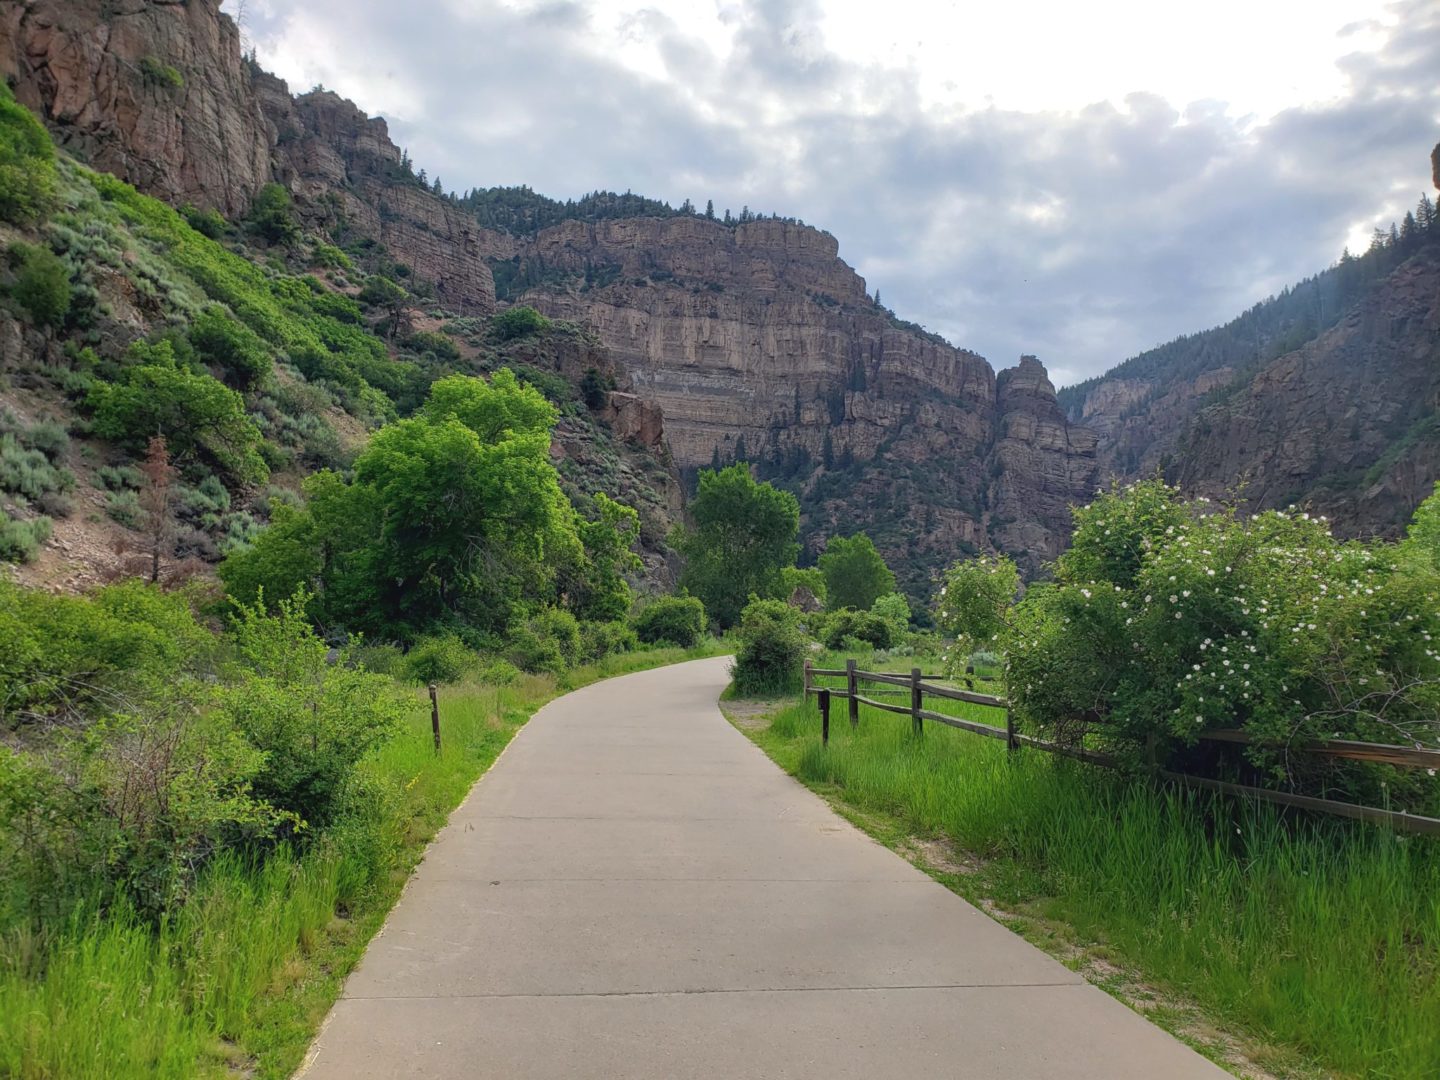 The hike starts by following the Glenwood Canyon Recreation Path for a couple hundred yards along the Colorado River